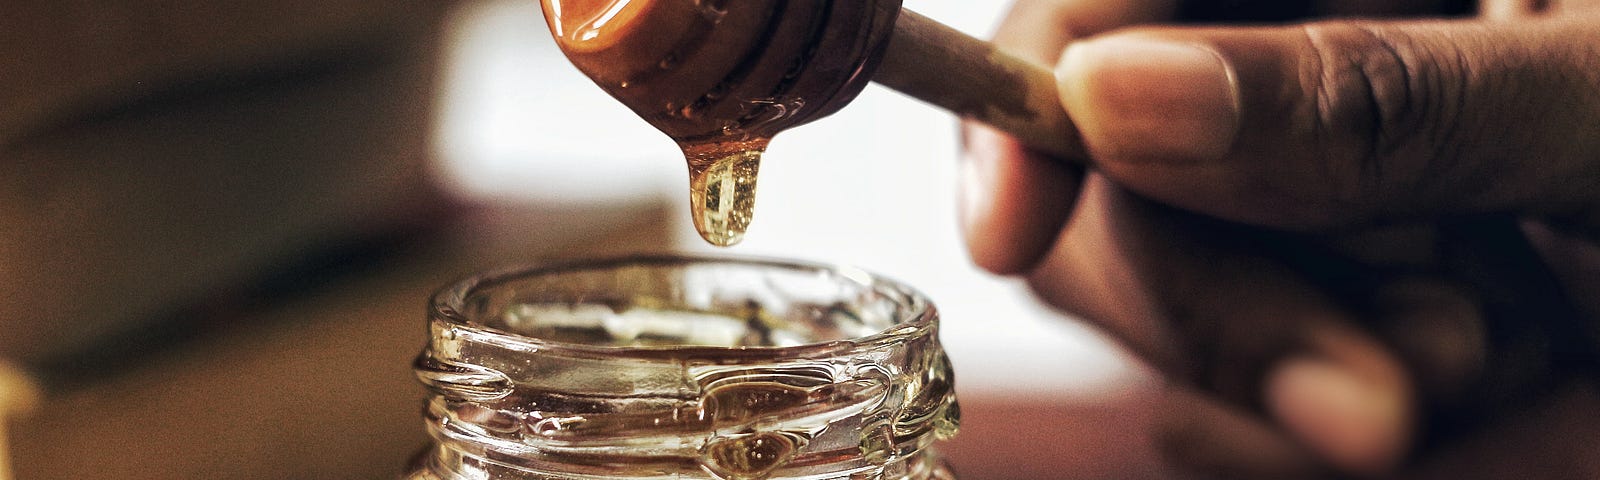 A hand lifts a honey dipper over a jar of honey. A single golden drop of honey is suspended from the dipper.